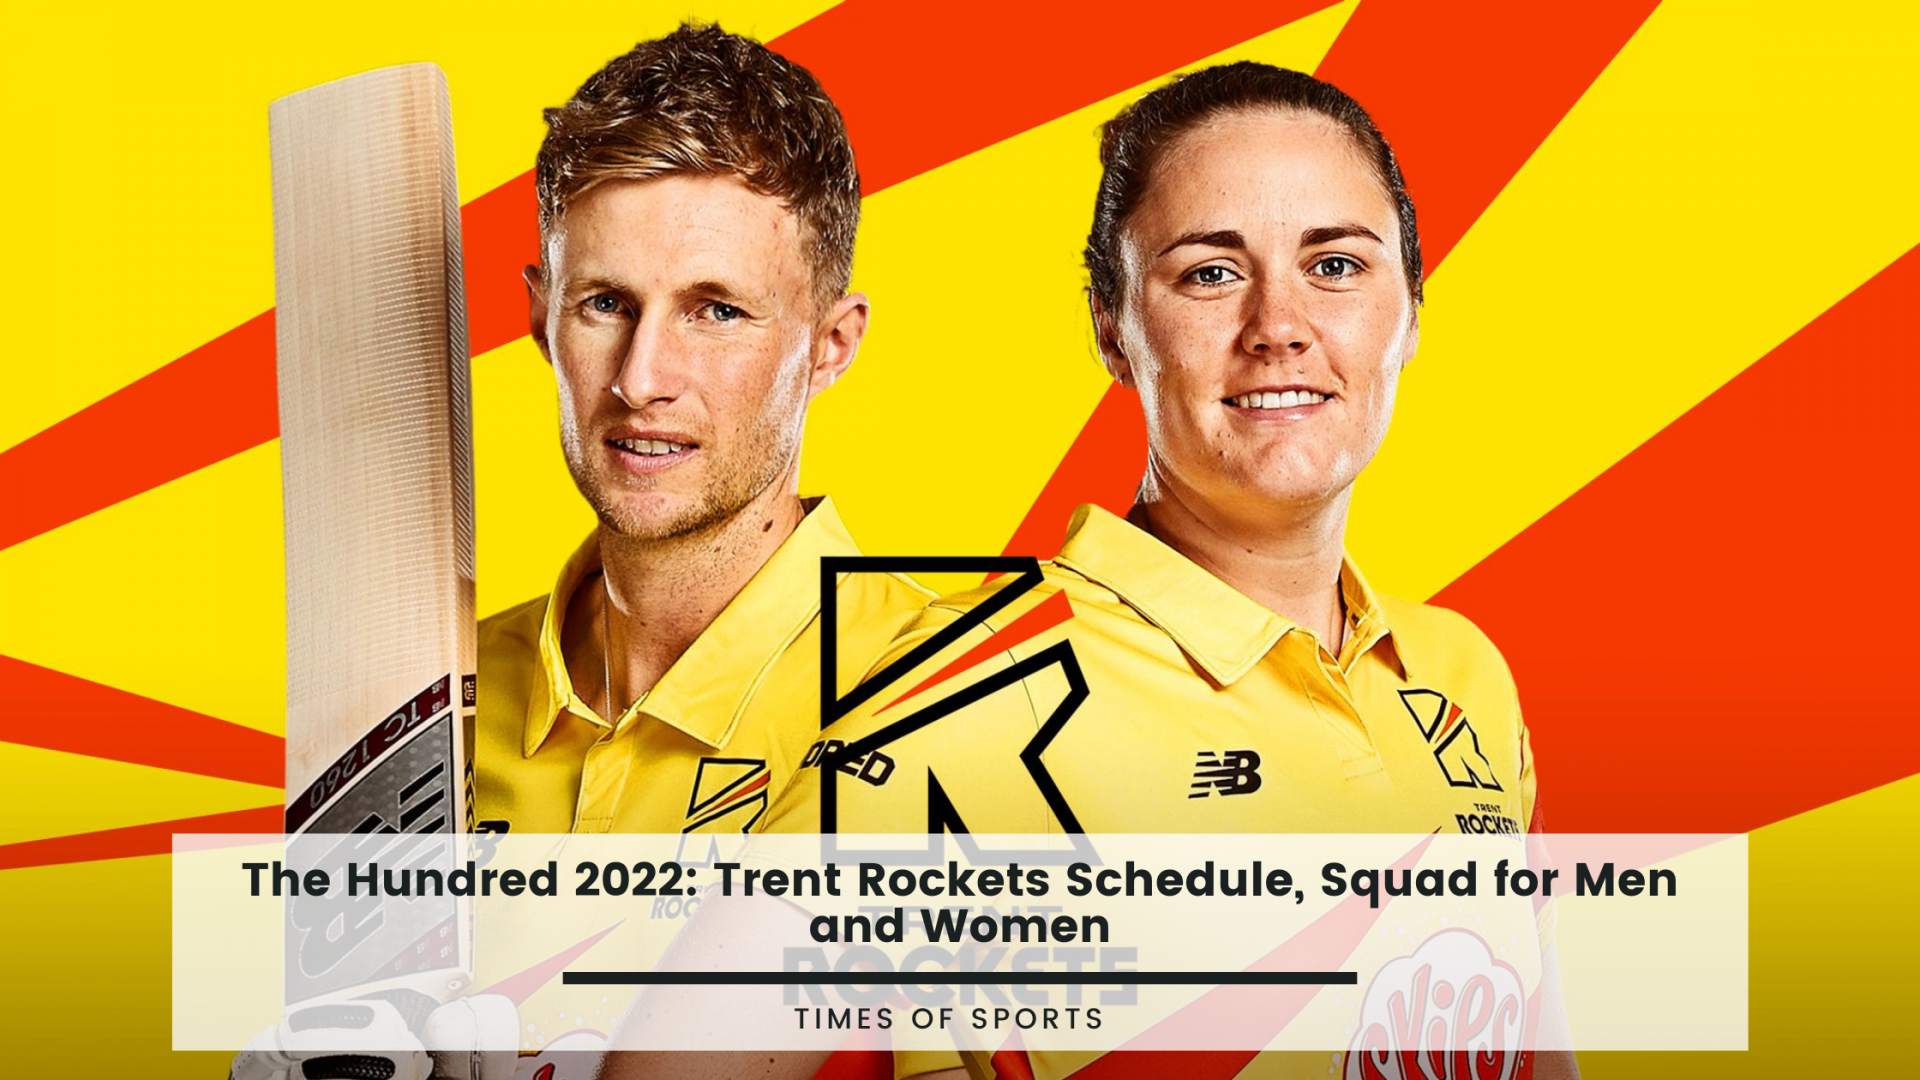 The Hundred 2022 Trent Rockets Schedule, Squad for Men and Women